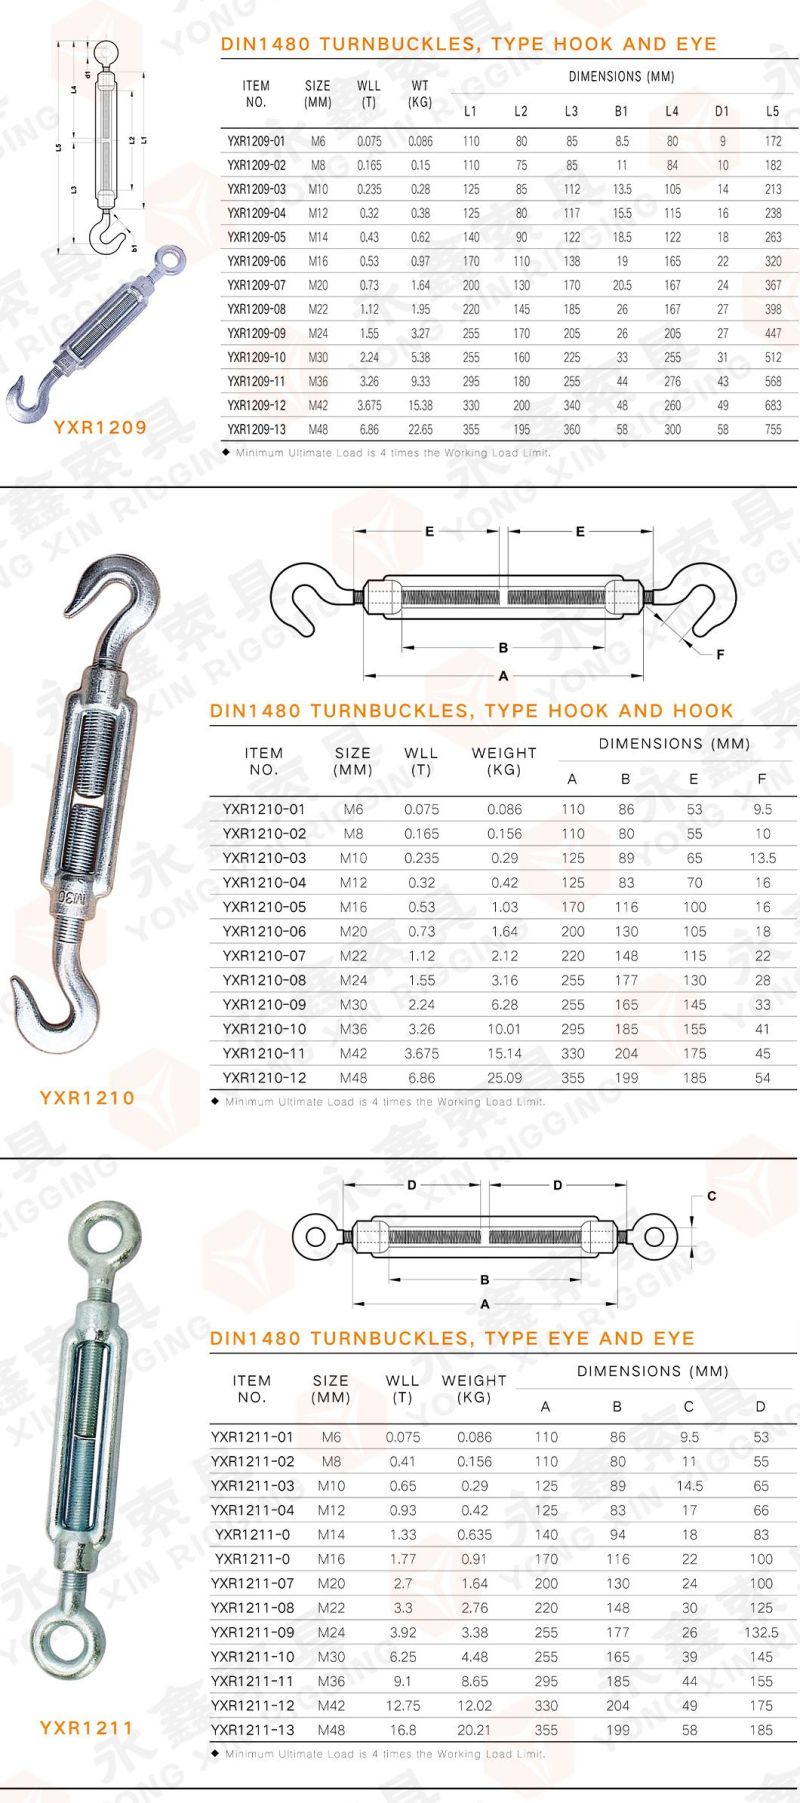 High Polished AISI304 316 Stainless Steel Double Hook DIN1480 Open Body Turnbuckle